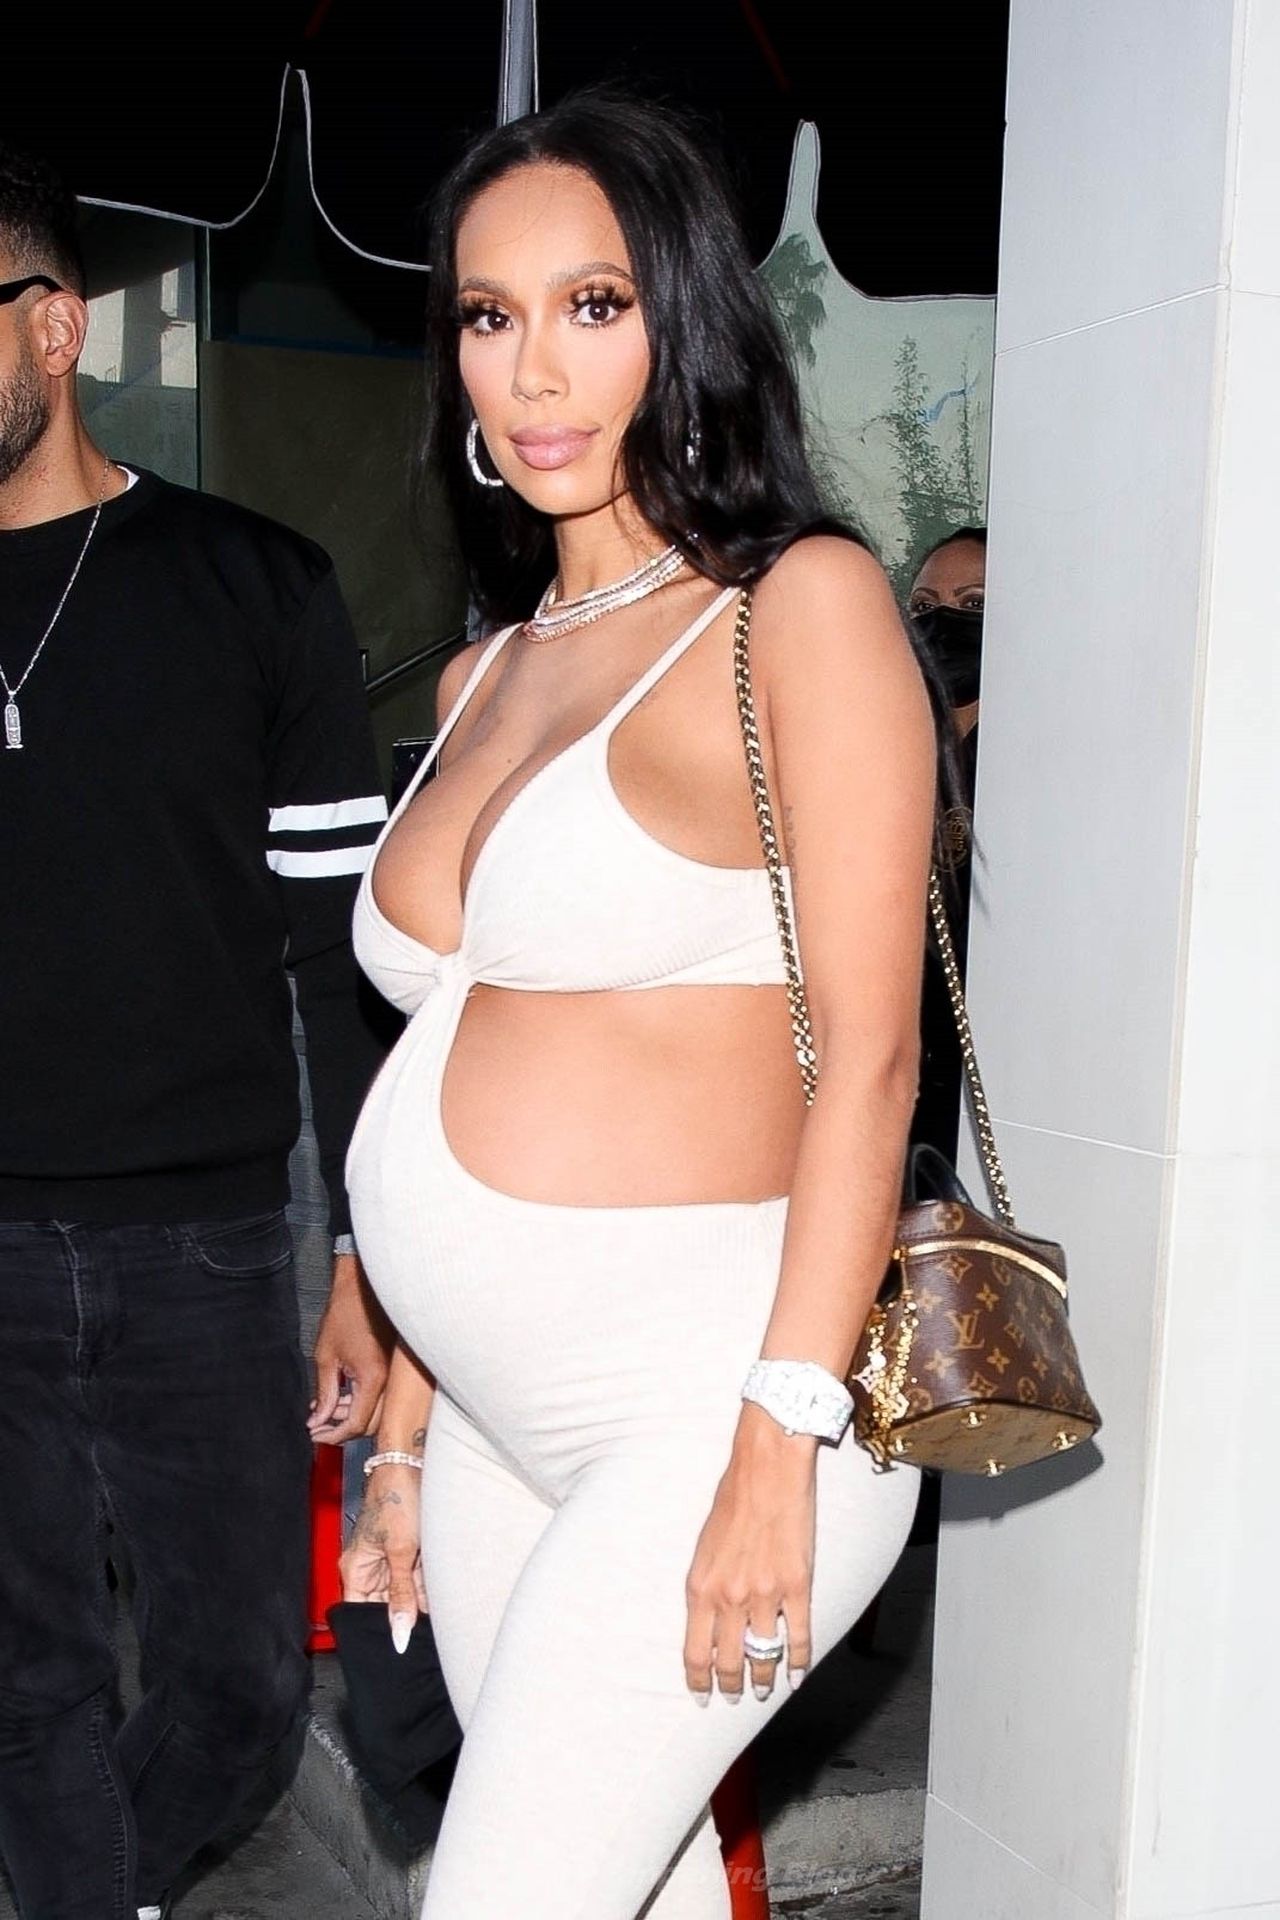 Erica Mena Flaunts Her Pregnant Boobs in a Revealing Outfit at Catch LA (29 Photos)